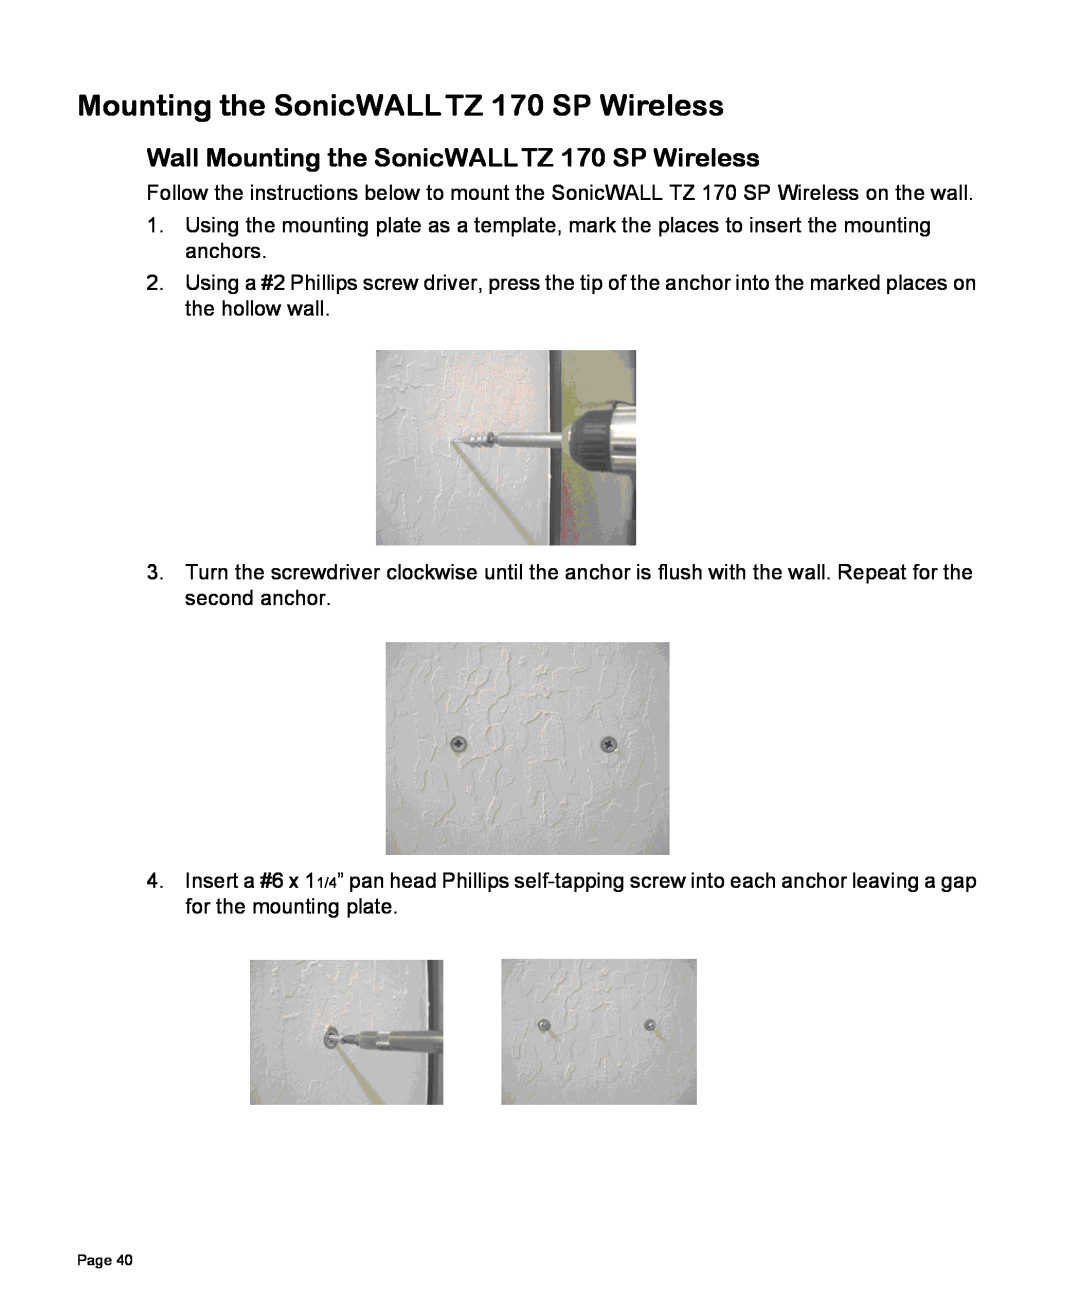 SonicWALL manual Wall Mounting the SonicWALL TZ 170 SP Wireless 